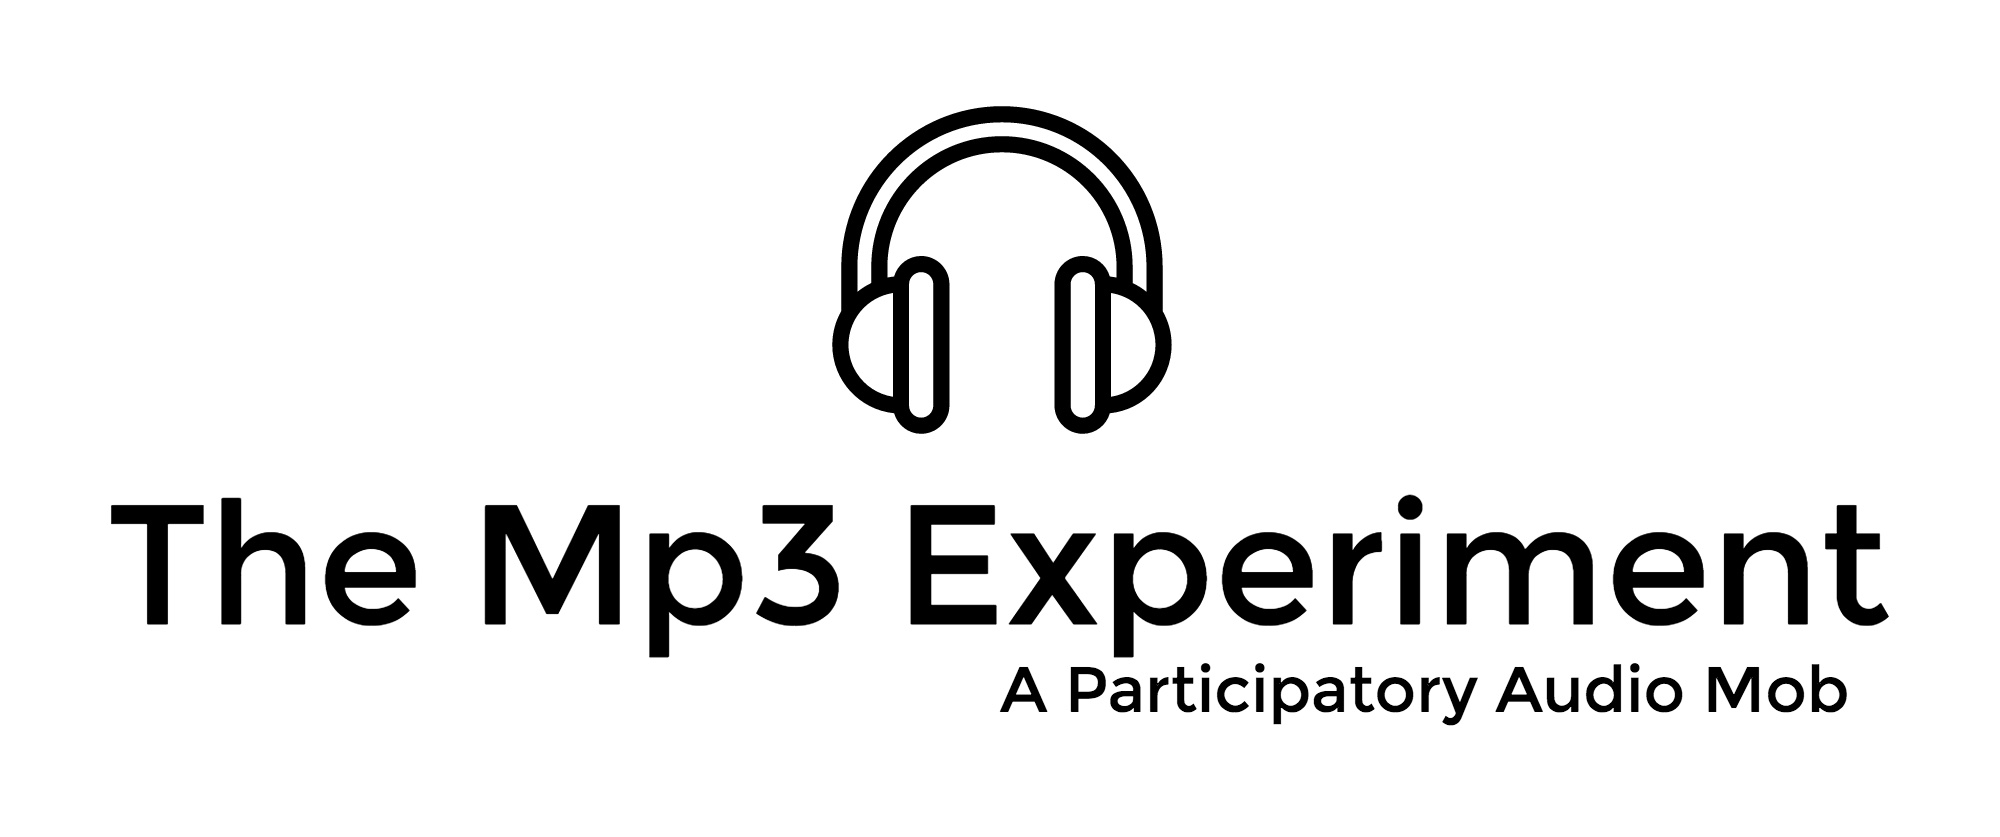 The Mp3 Experiment